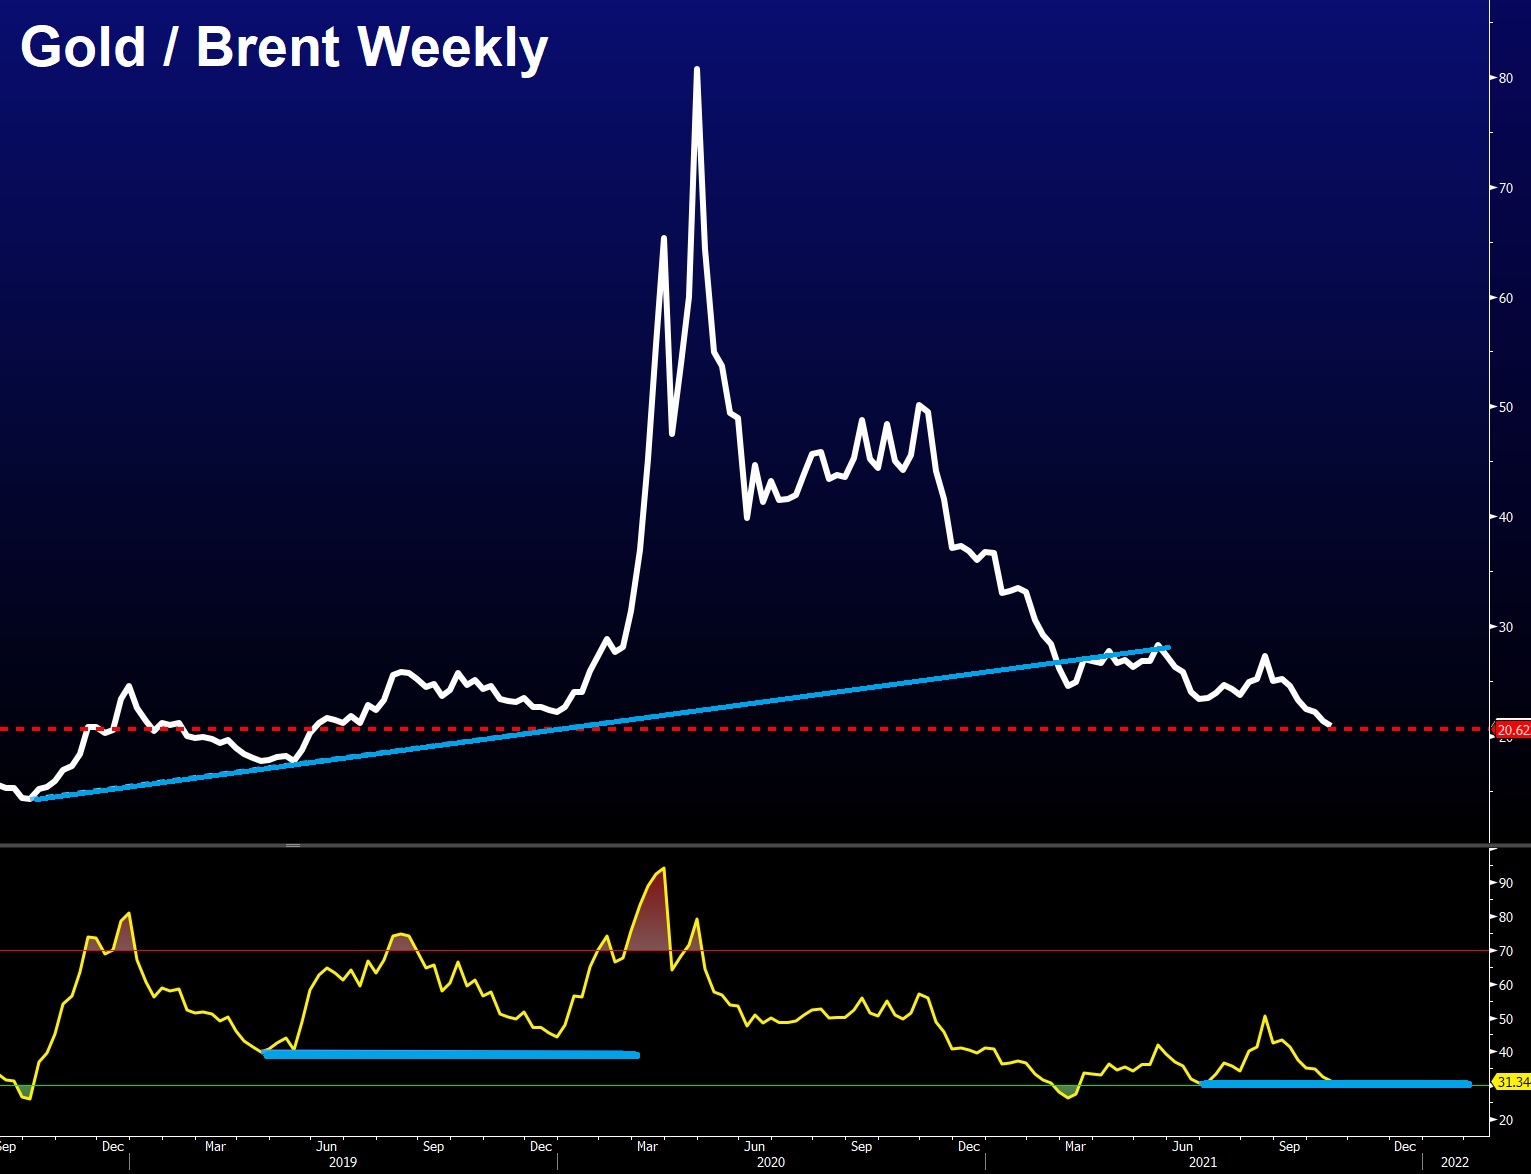 Gold/Brent Weekly Chart